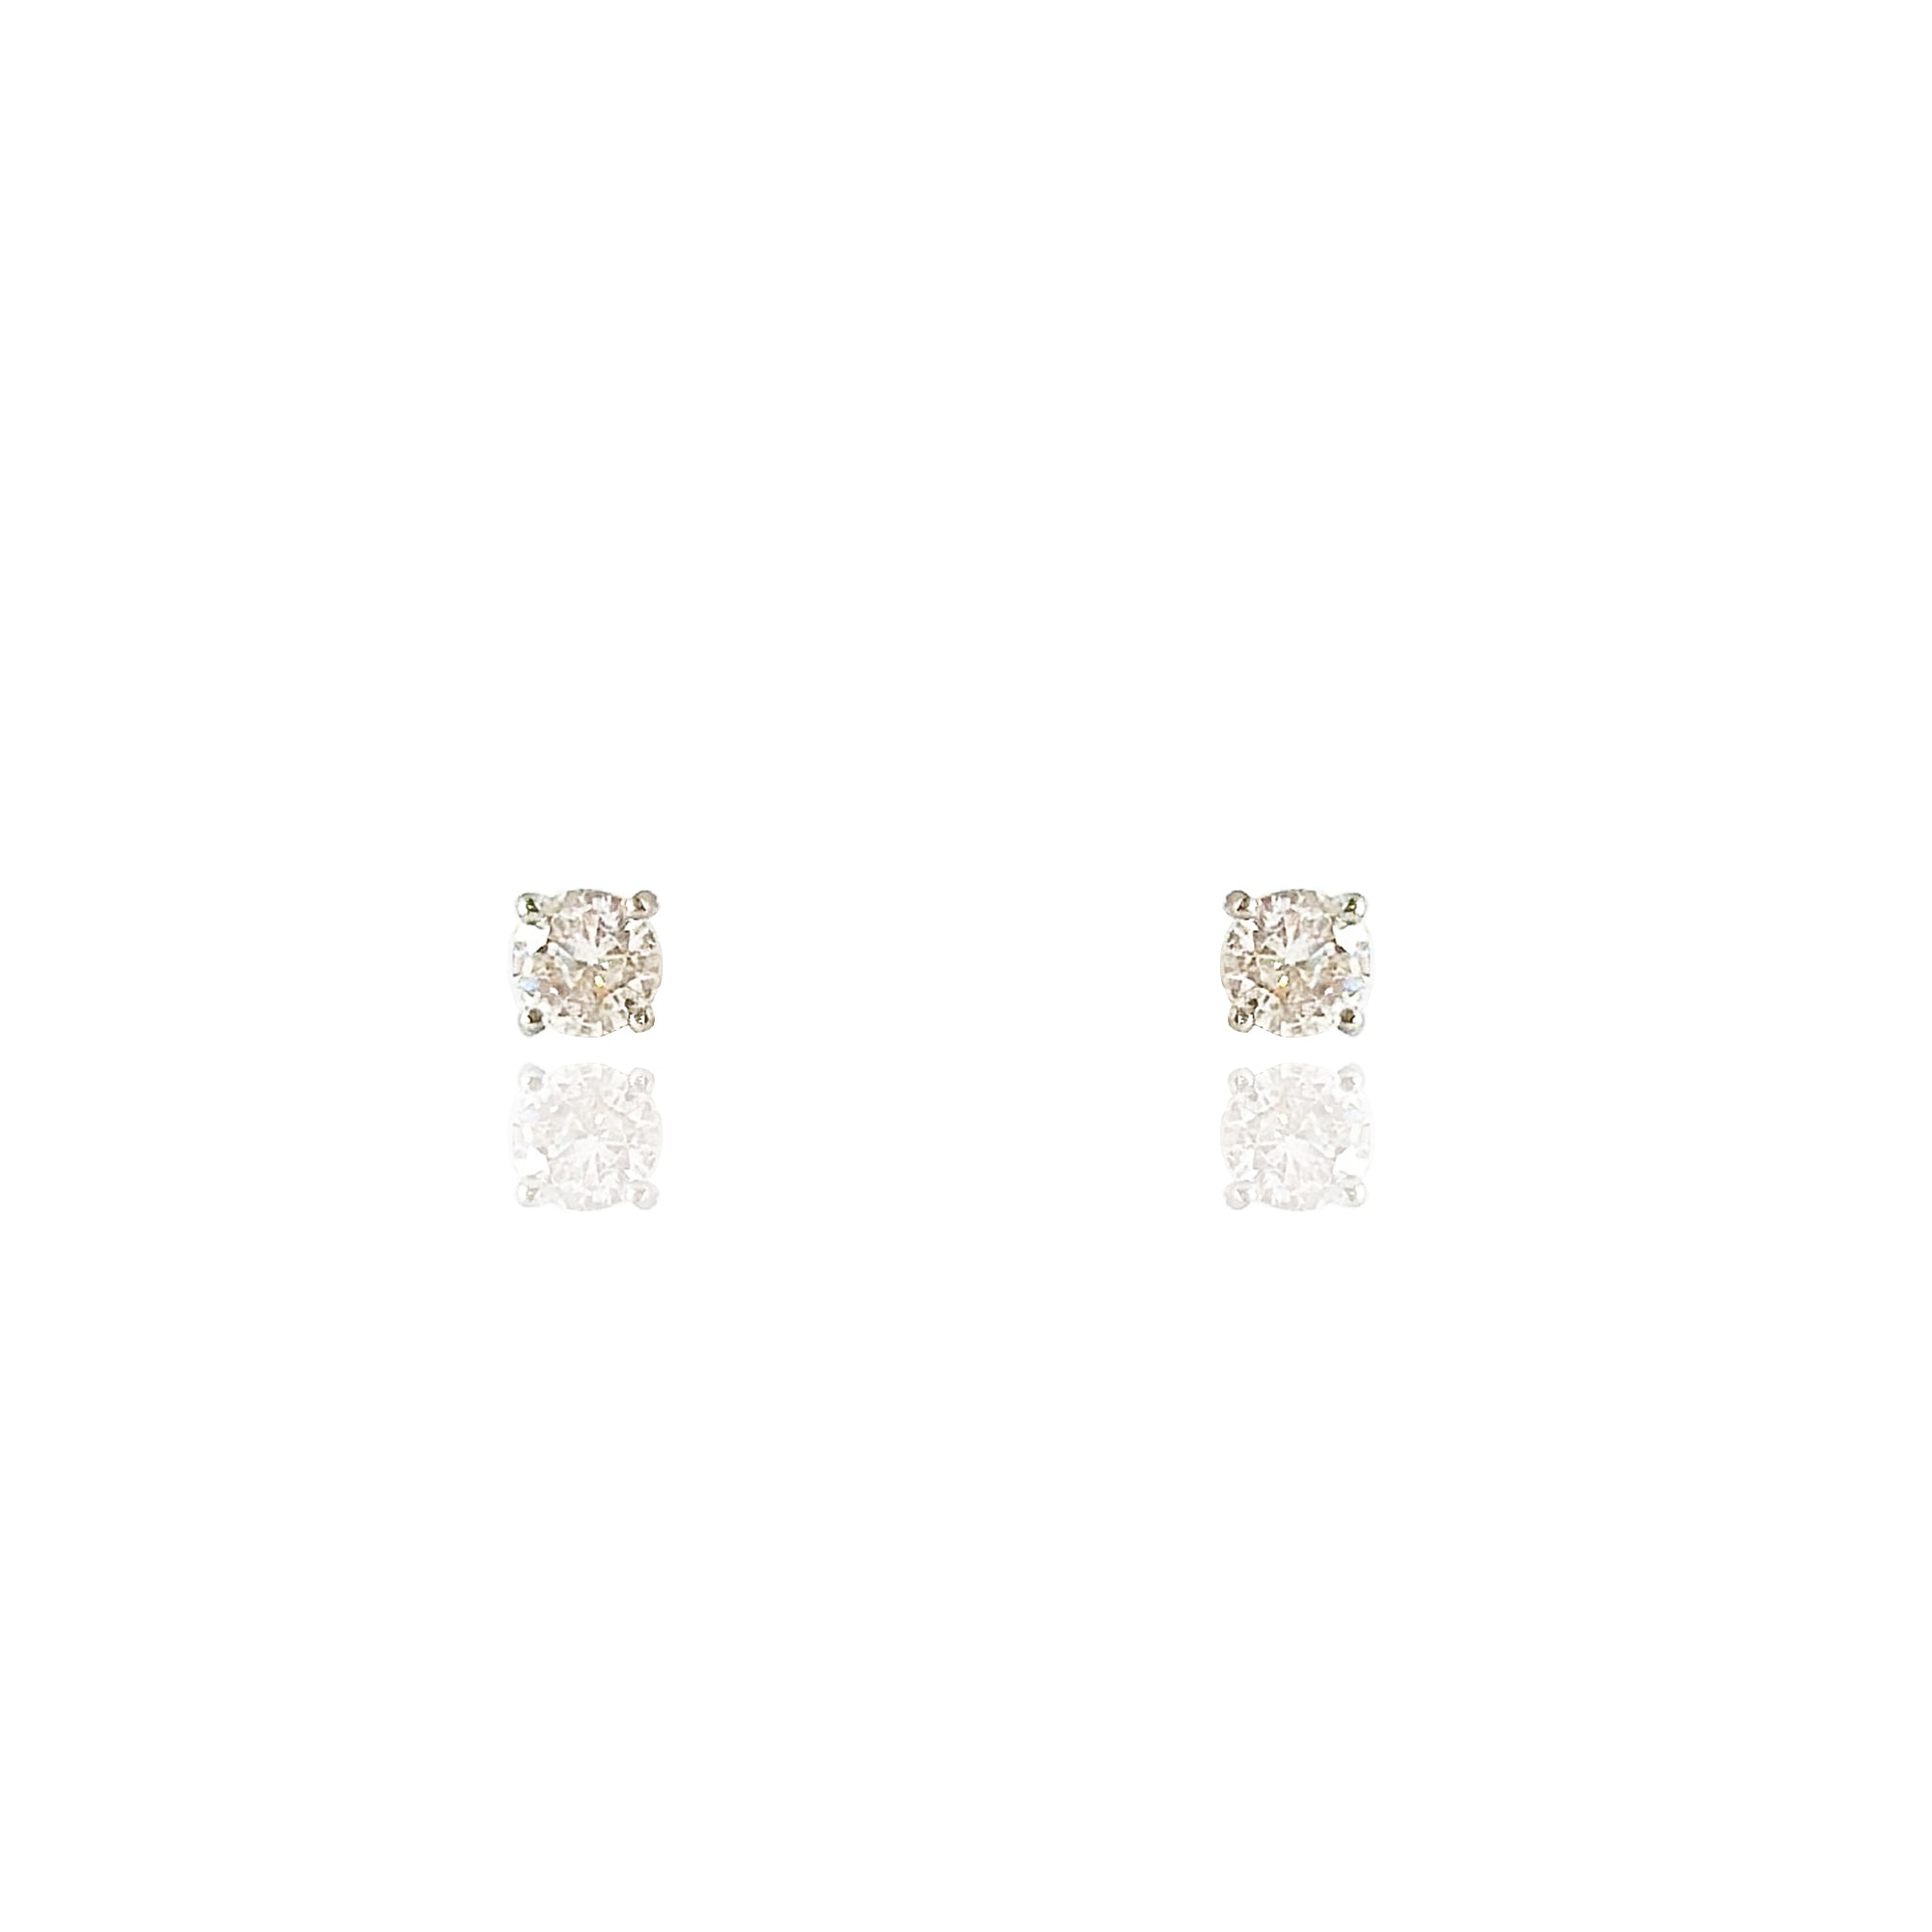 4 Prong Solitaire Diamond Earrings